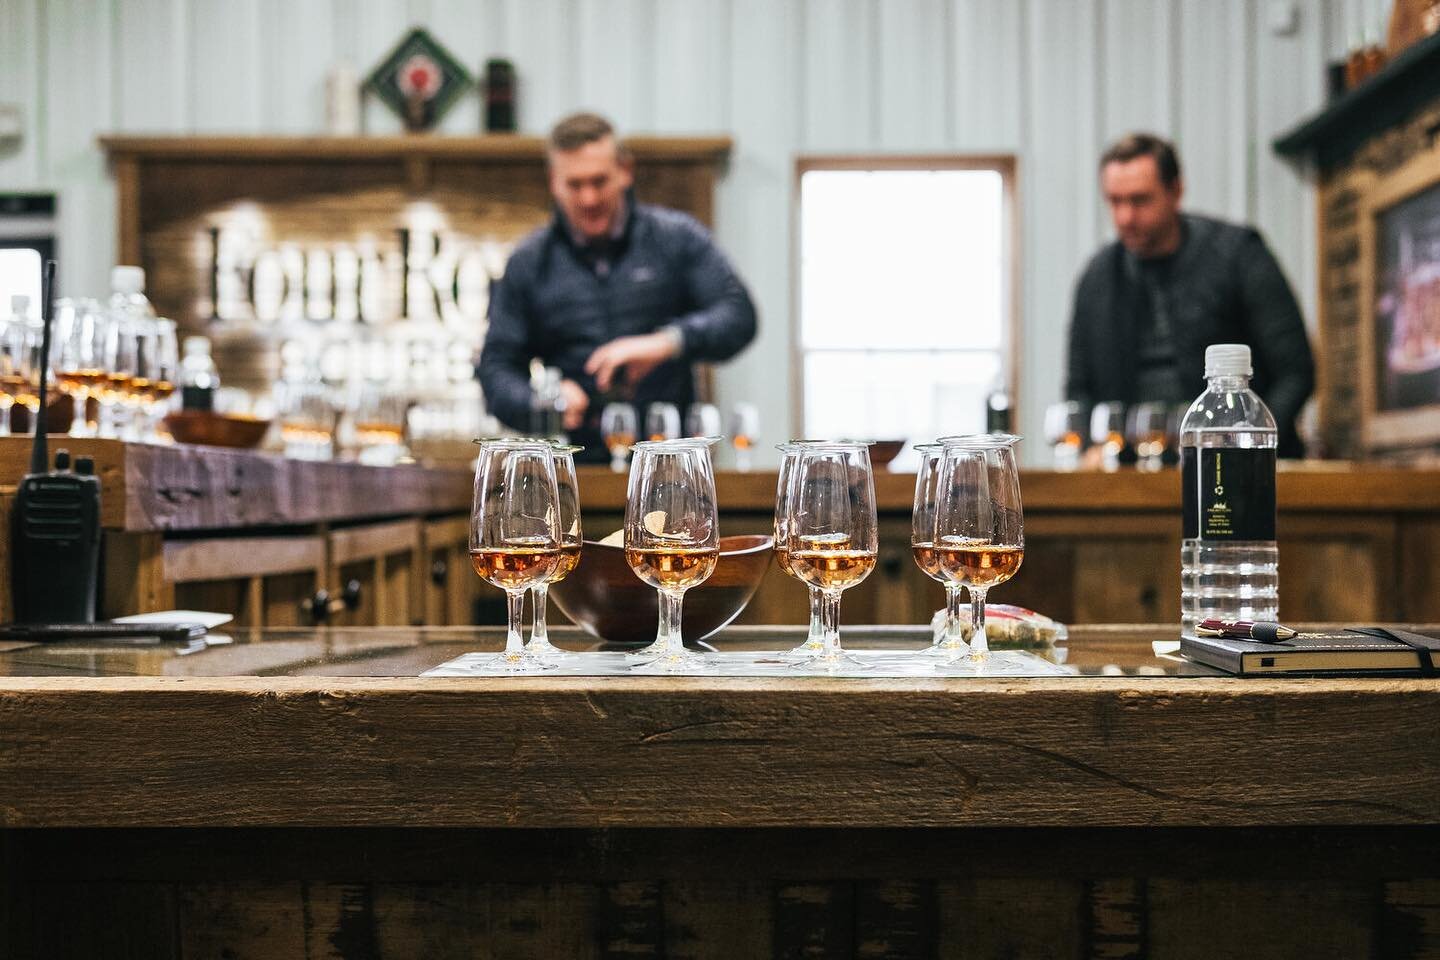 Our episode Tasting Through @fourrosesbourbon is now up on entryproofpodcast.com and other podcast media outlets. We talk a bit about the varying recipes, taste through some single barrels, and a few limited edition releases as well. Be sure to subsc